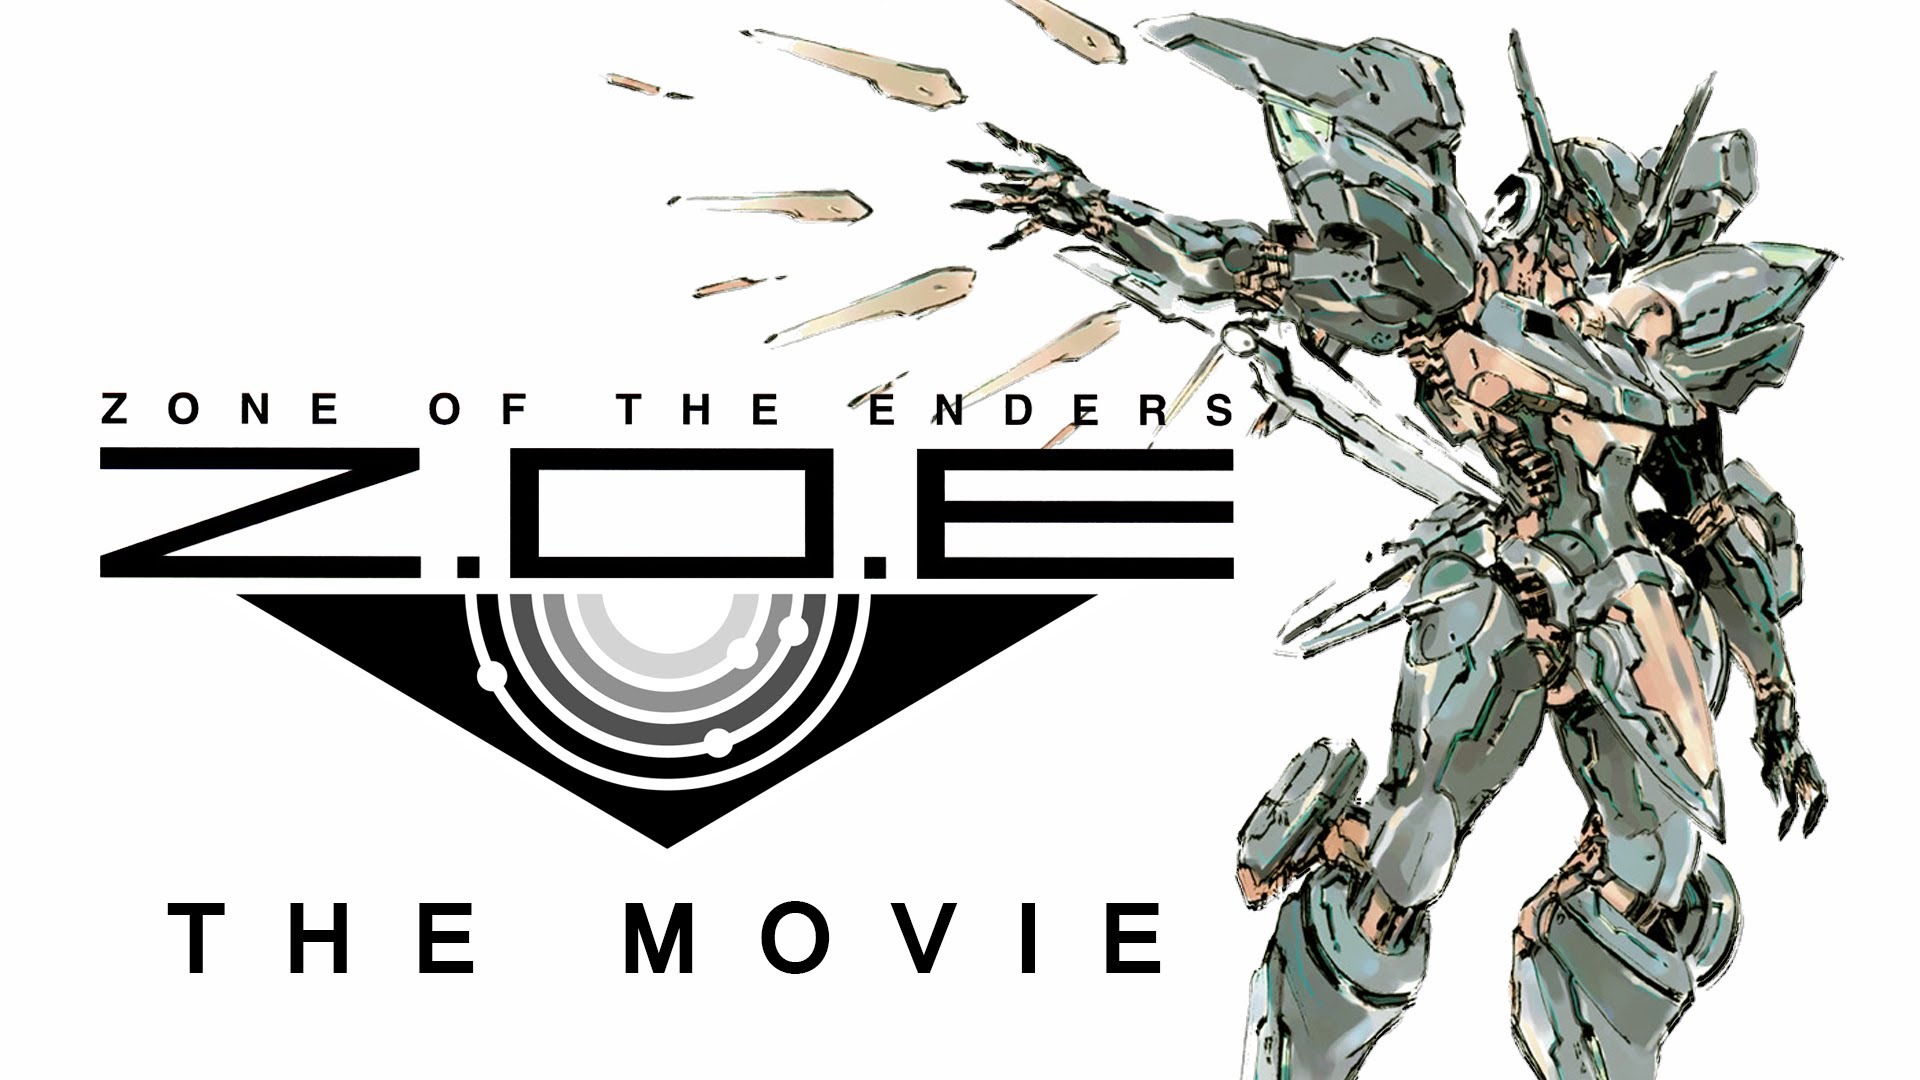 High Resolution Wallpaper | Zone Of The Enders 1920x1080 px